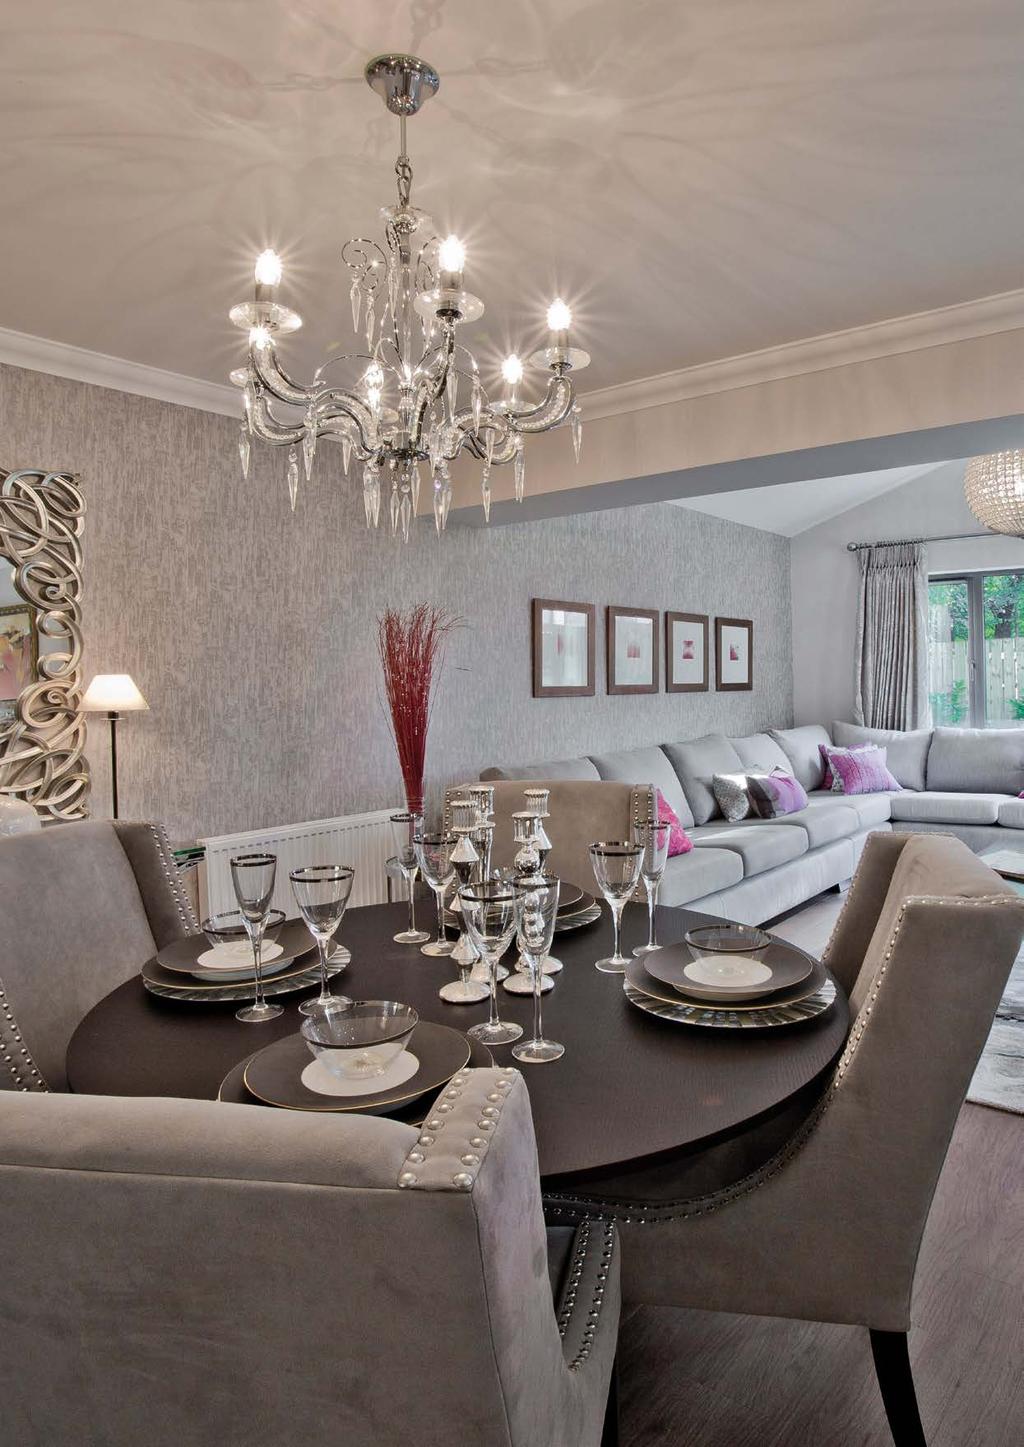 The Beech show home The Beech show home Stylish, practical & comfortable homes Designed using the latest